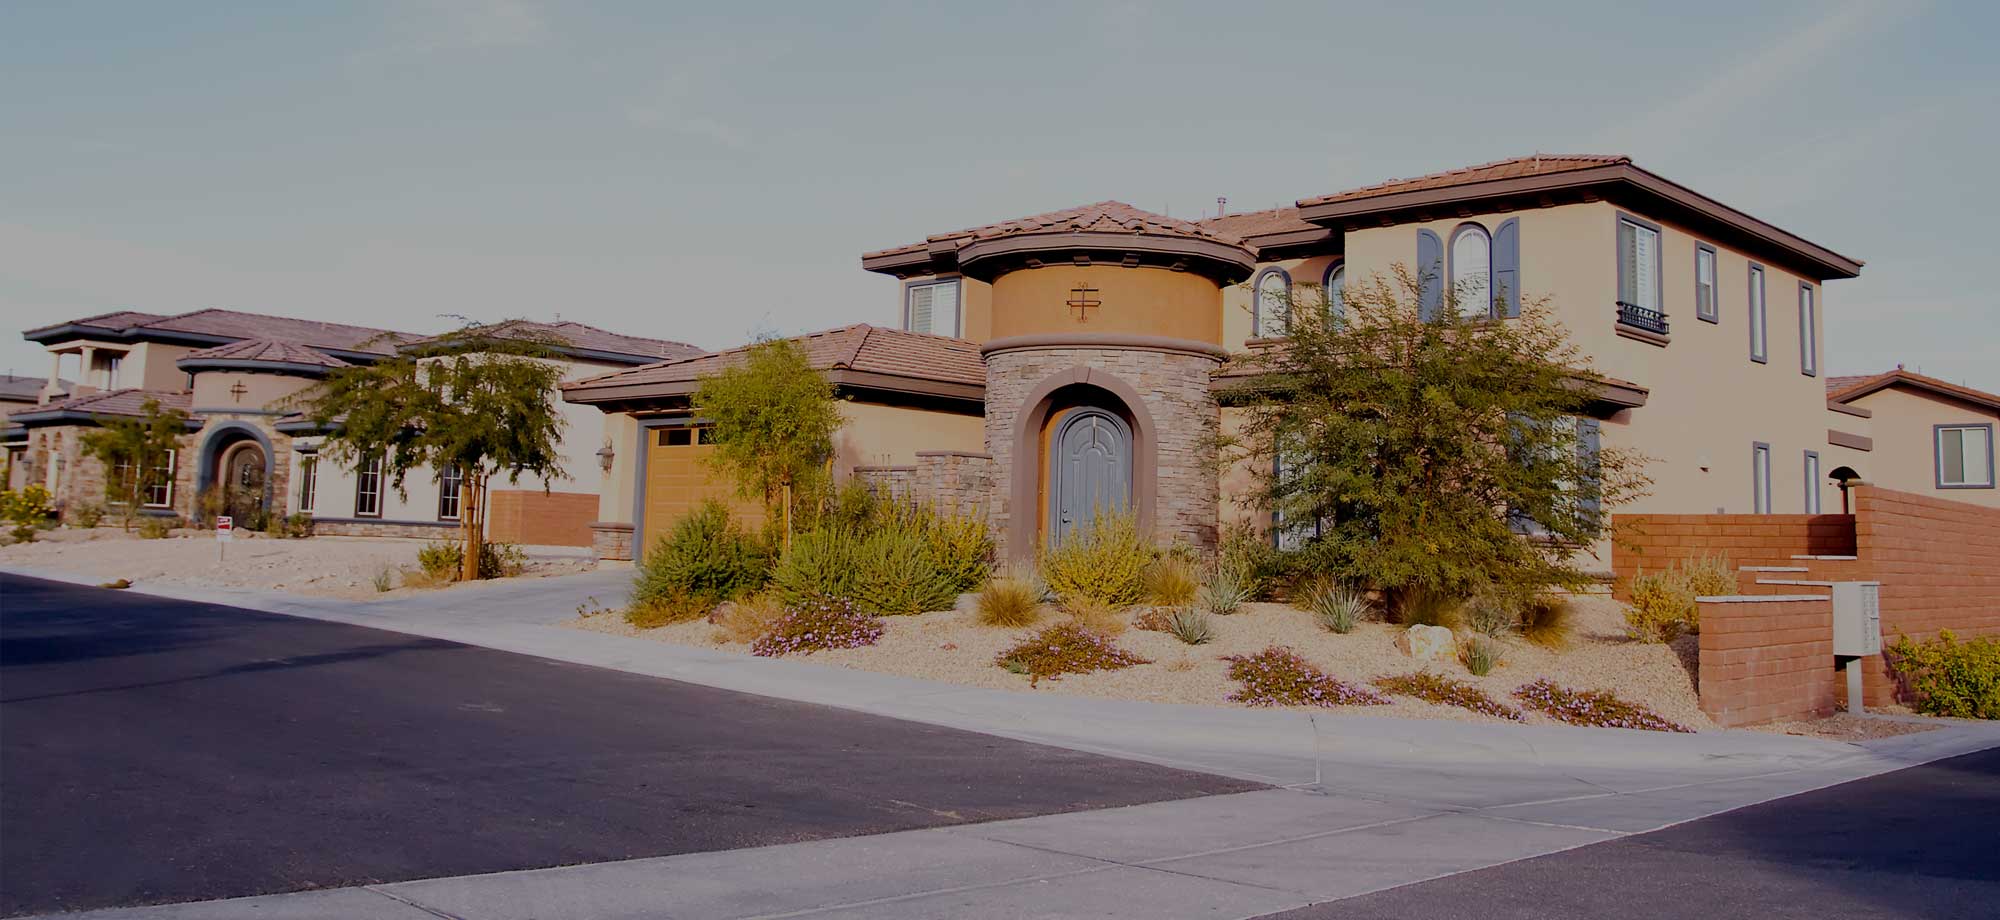 How To Find The Right Las Vegas Investment Property